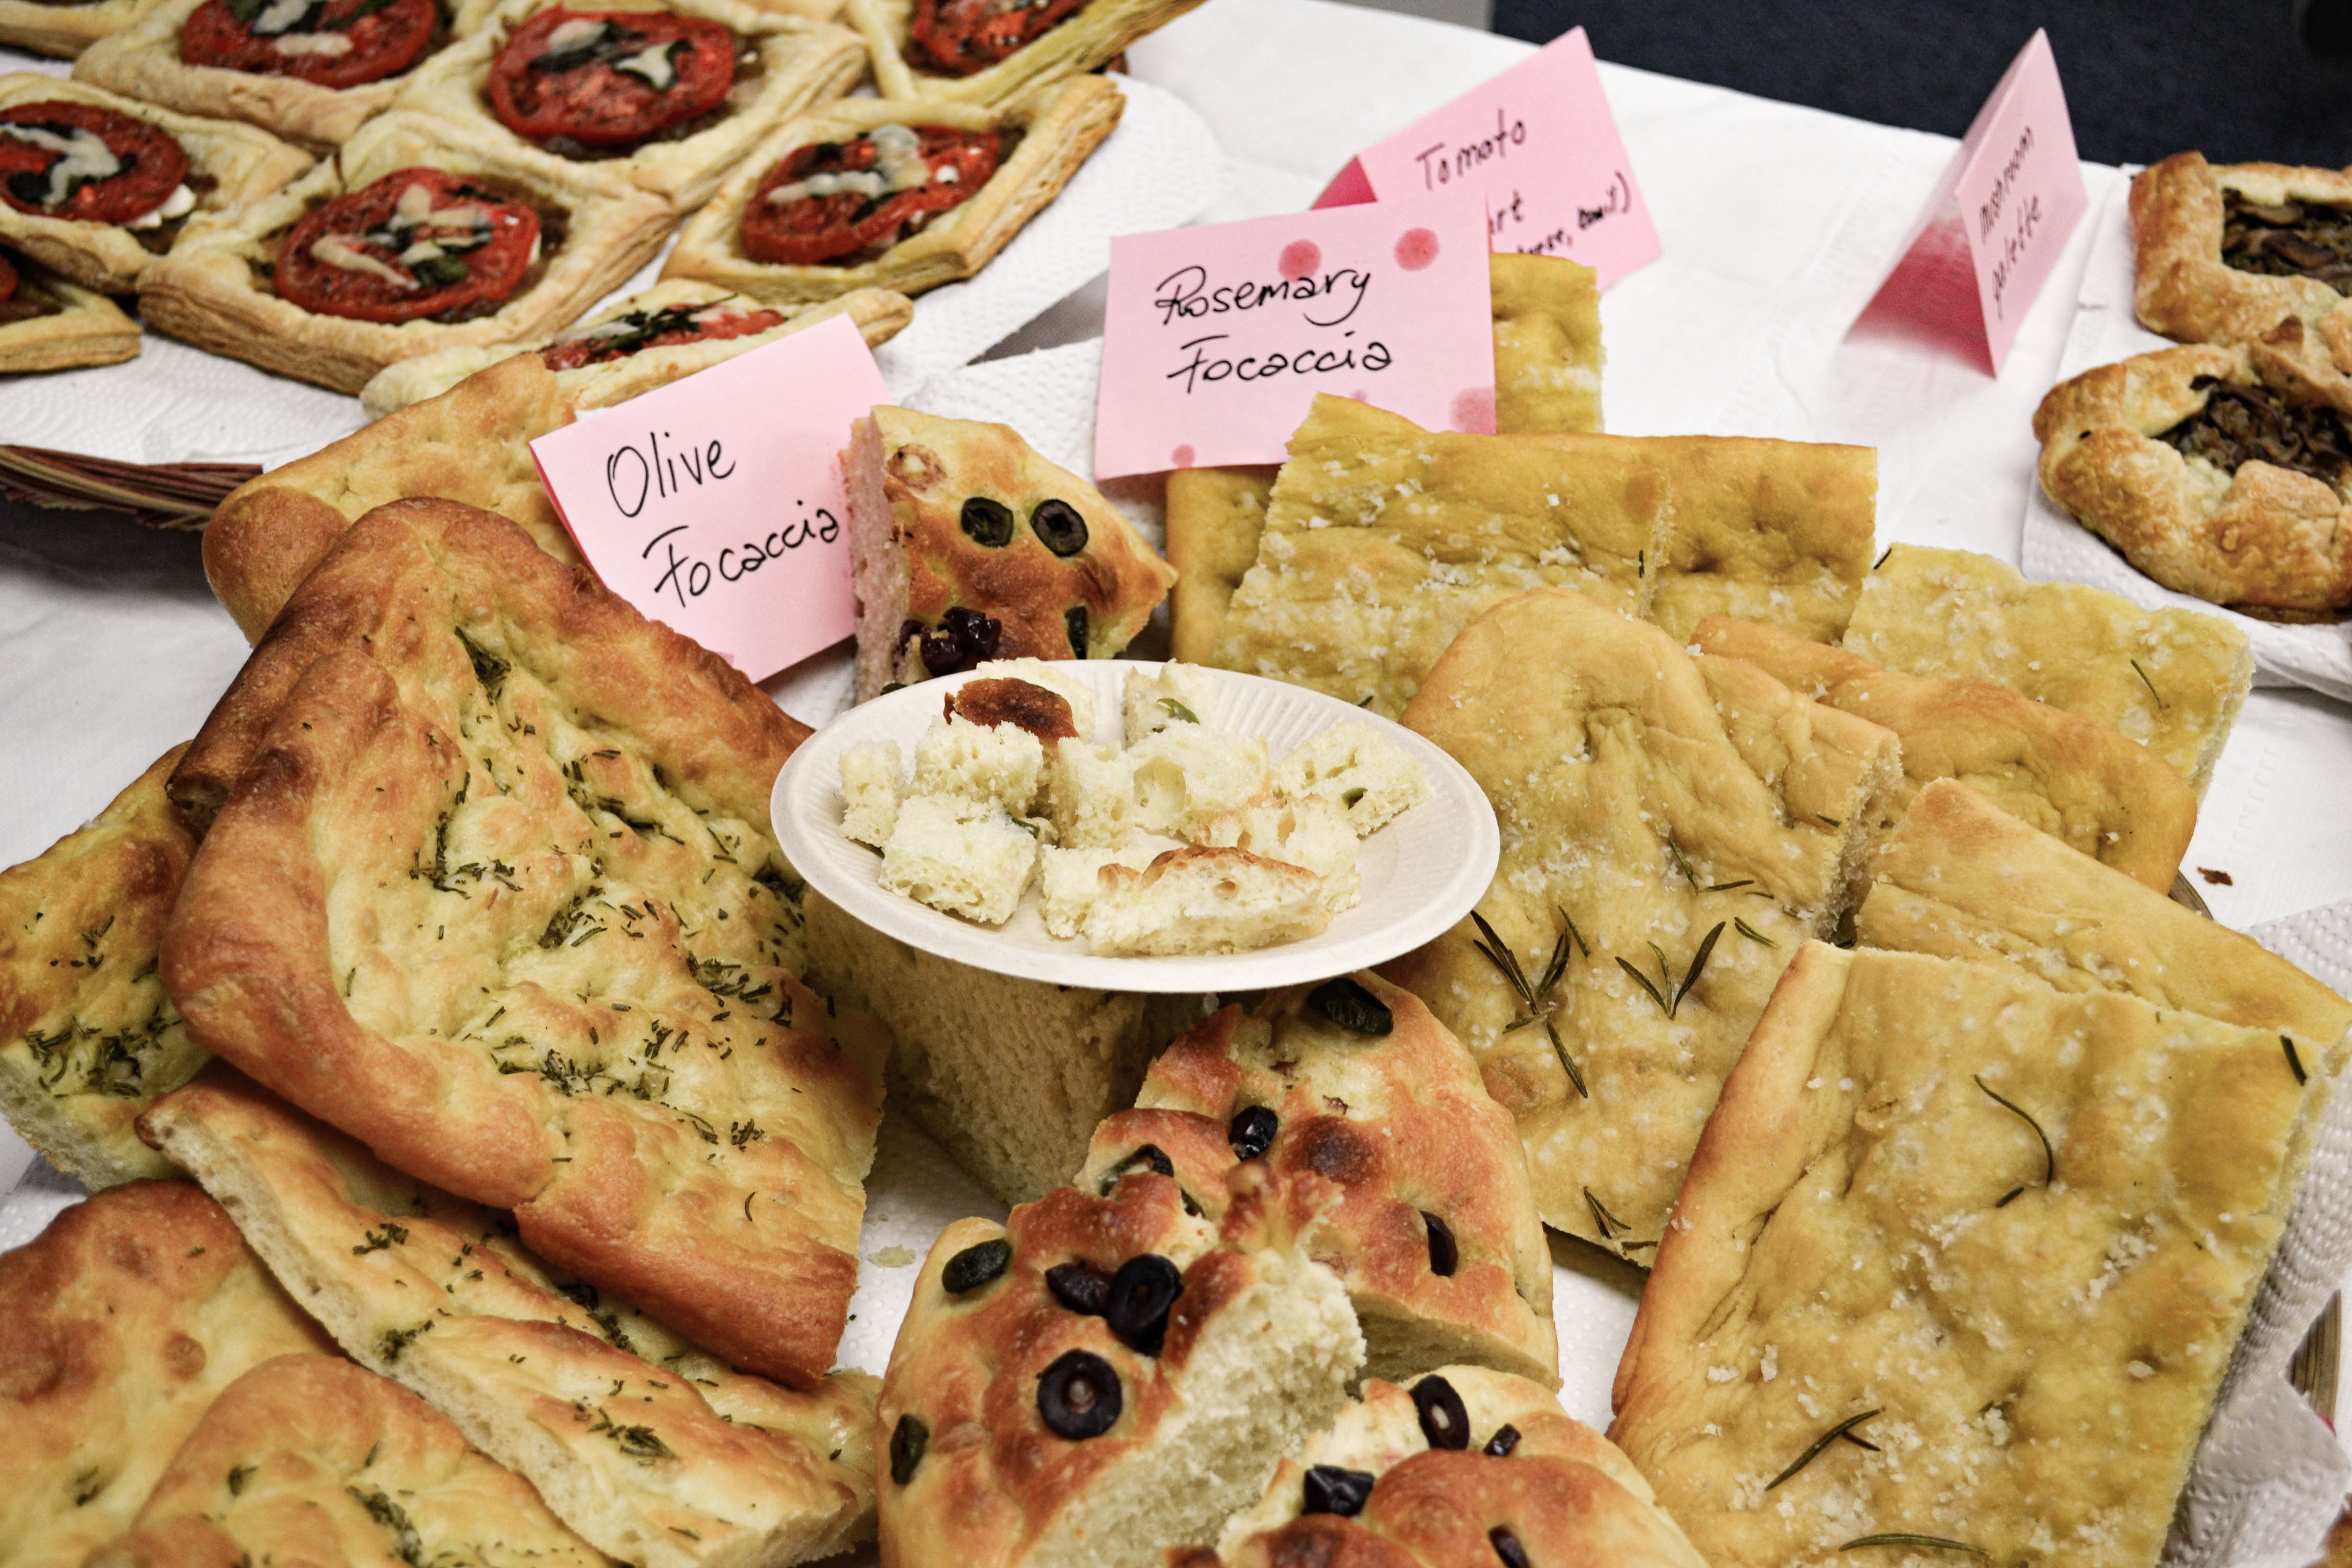 Olive and rosemary focaccia bread at Diplomatic Language Services Susan G. Komen Foundation bake sale